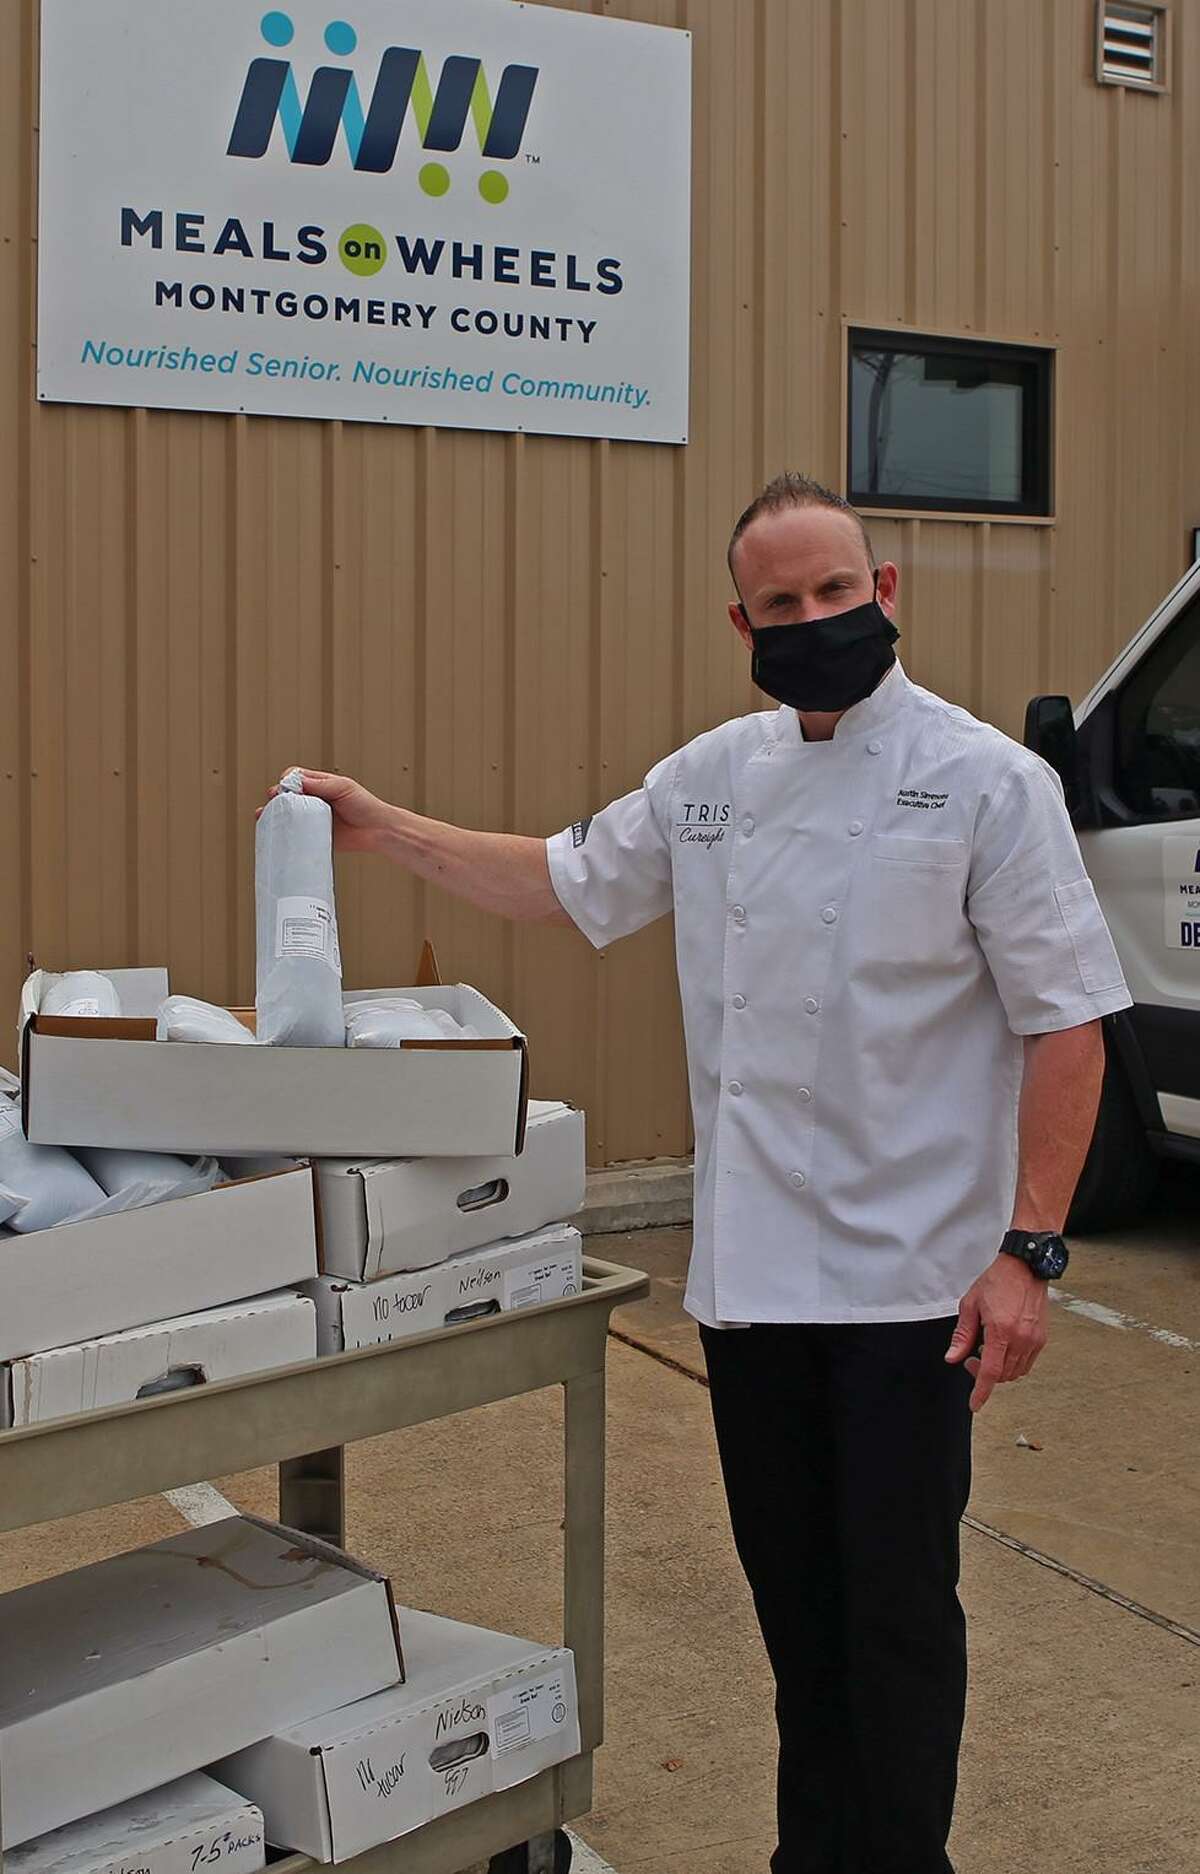 Chef Austin Simmons of TRIS in The Woodlands provided over 1,000 pounds of ground beef to Meals on Wheels Montgomery County (MOWMC), assisting in their mission to provide nutritious meals to homebound seniors. The donation will generate 5,000 servings to local homebound seniors in the community.